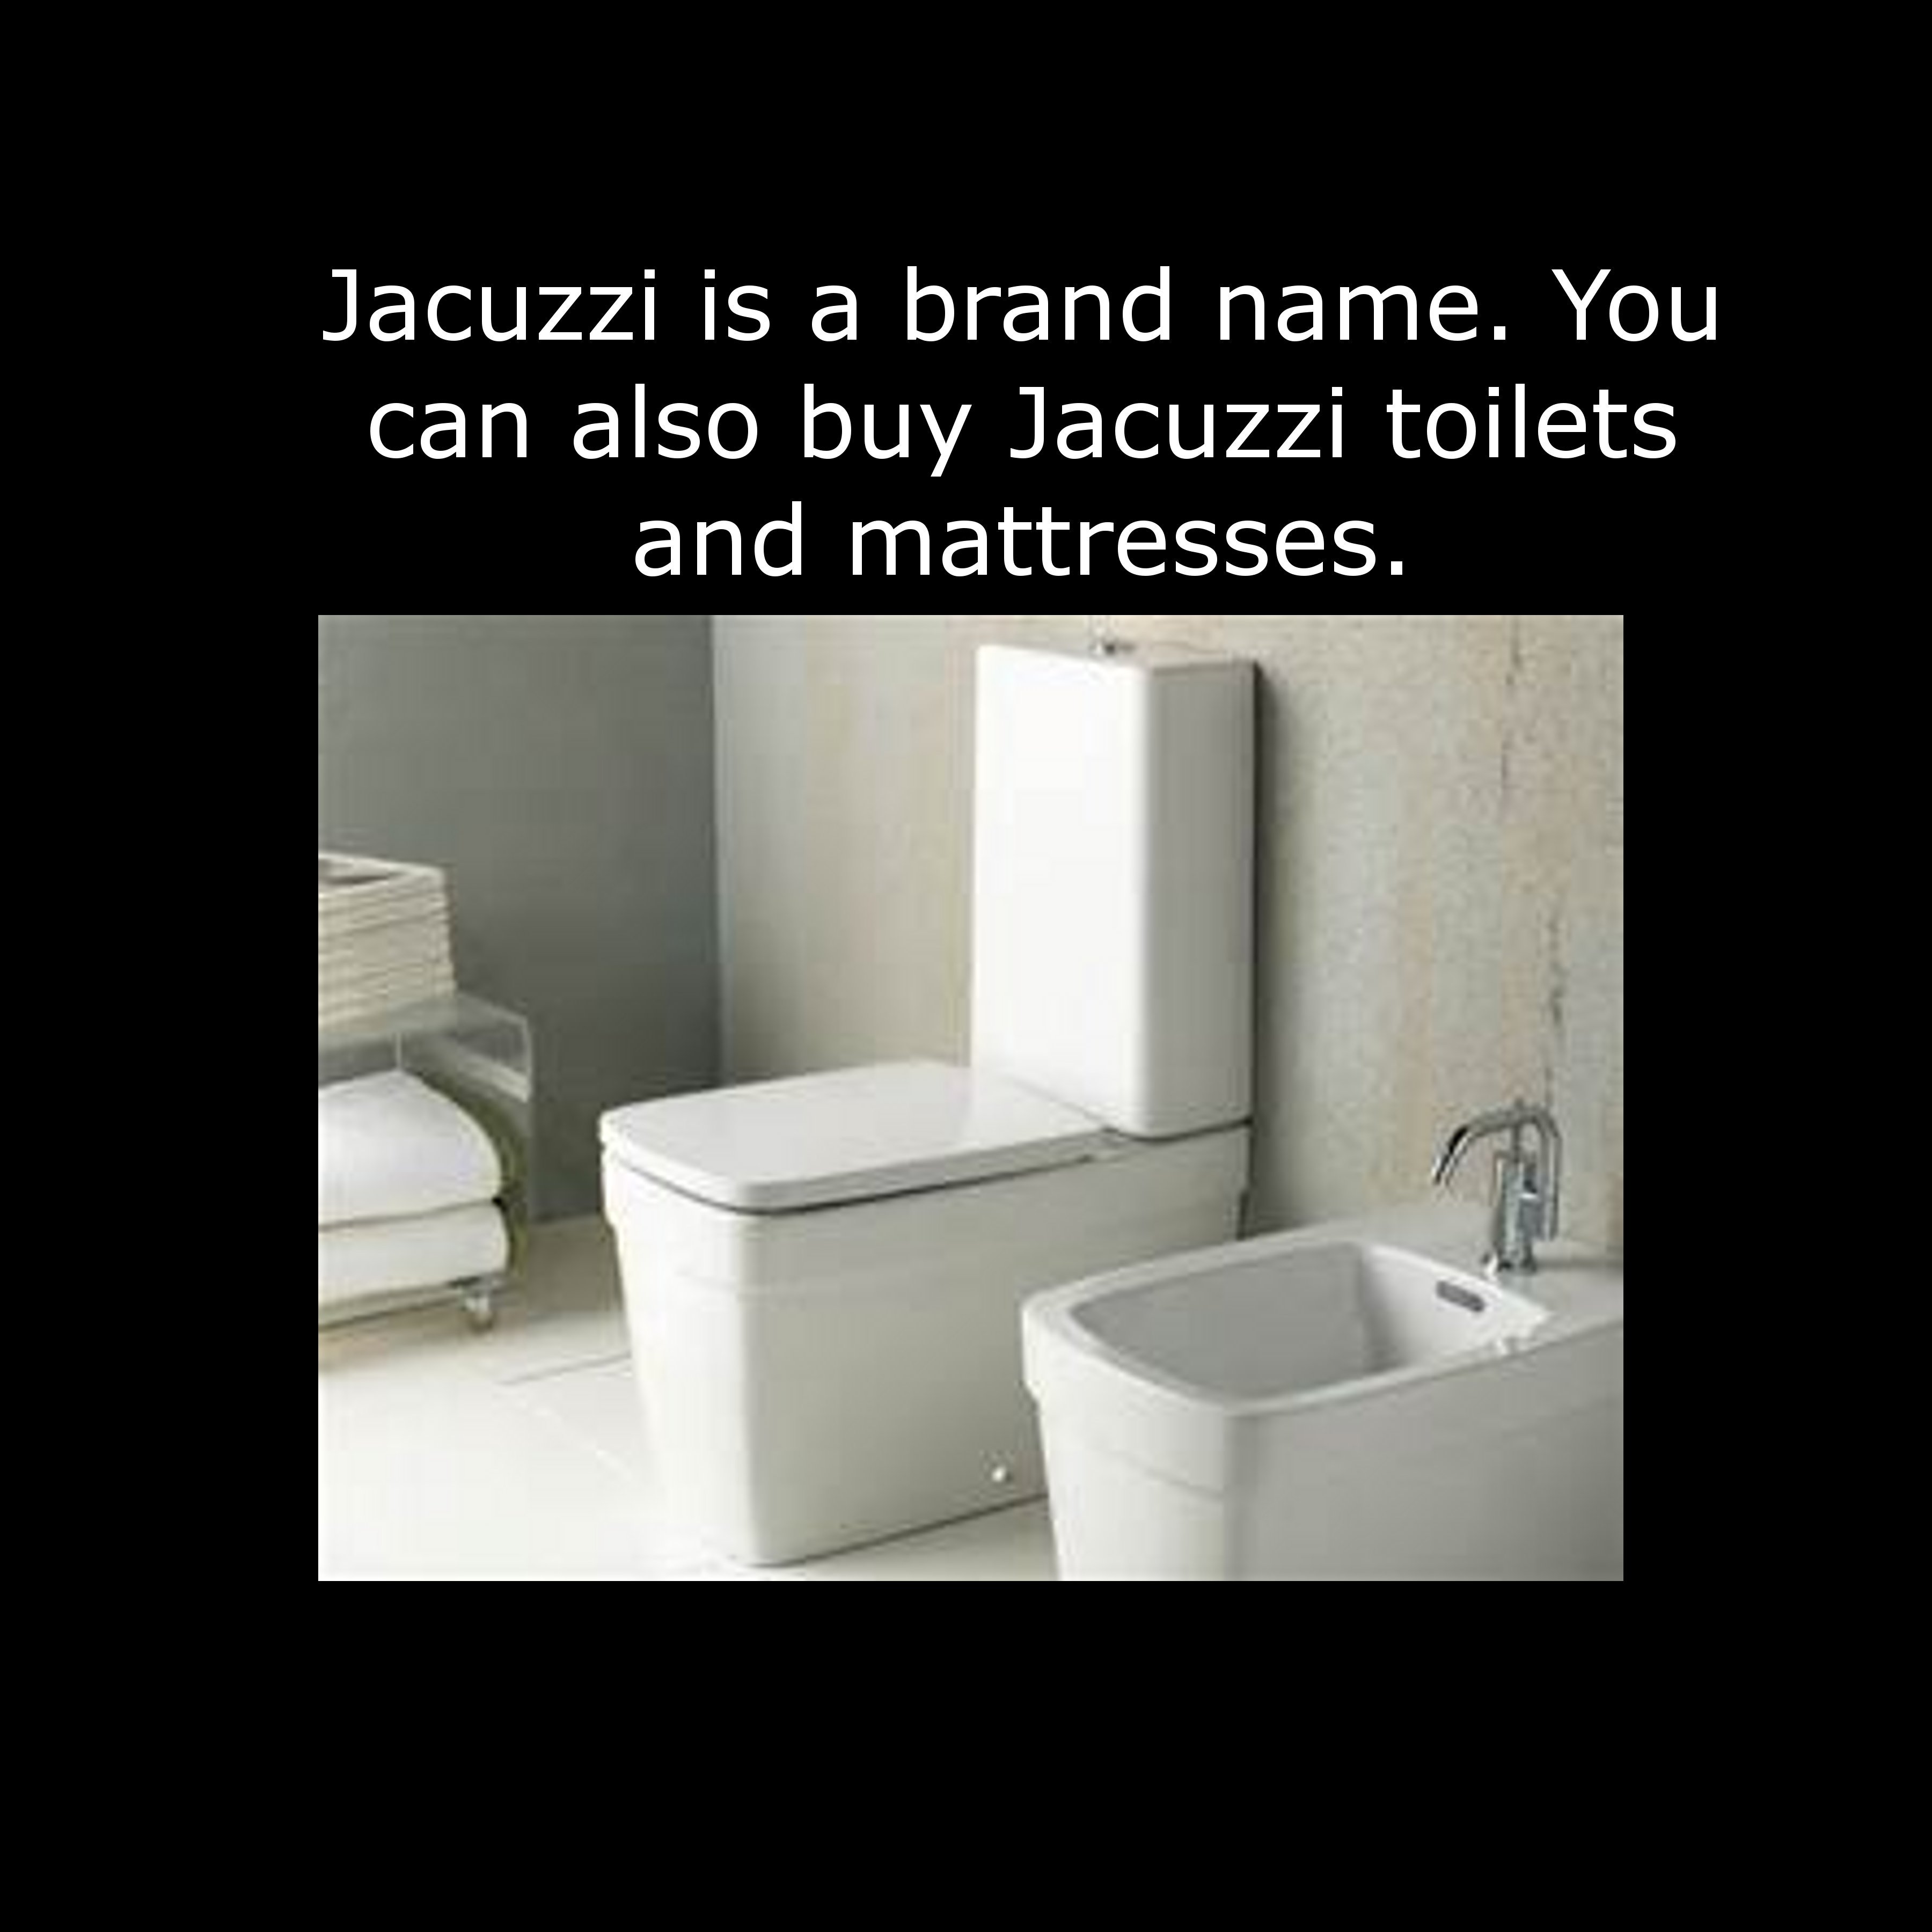 tap - Jacuzzi is a brand name. You can also buy Jacuzzi toilets and mattresses.